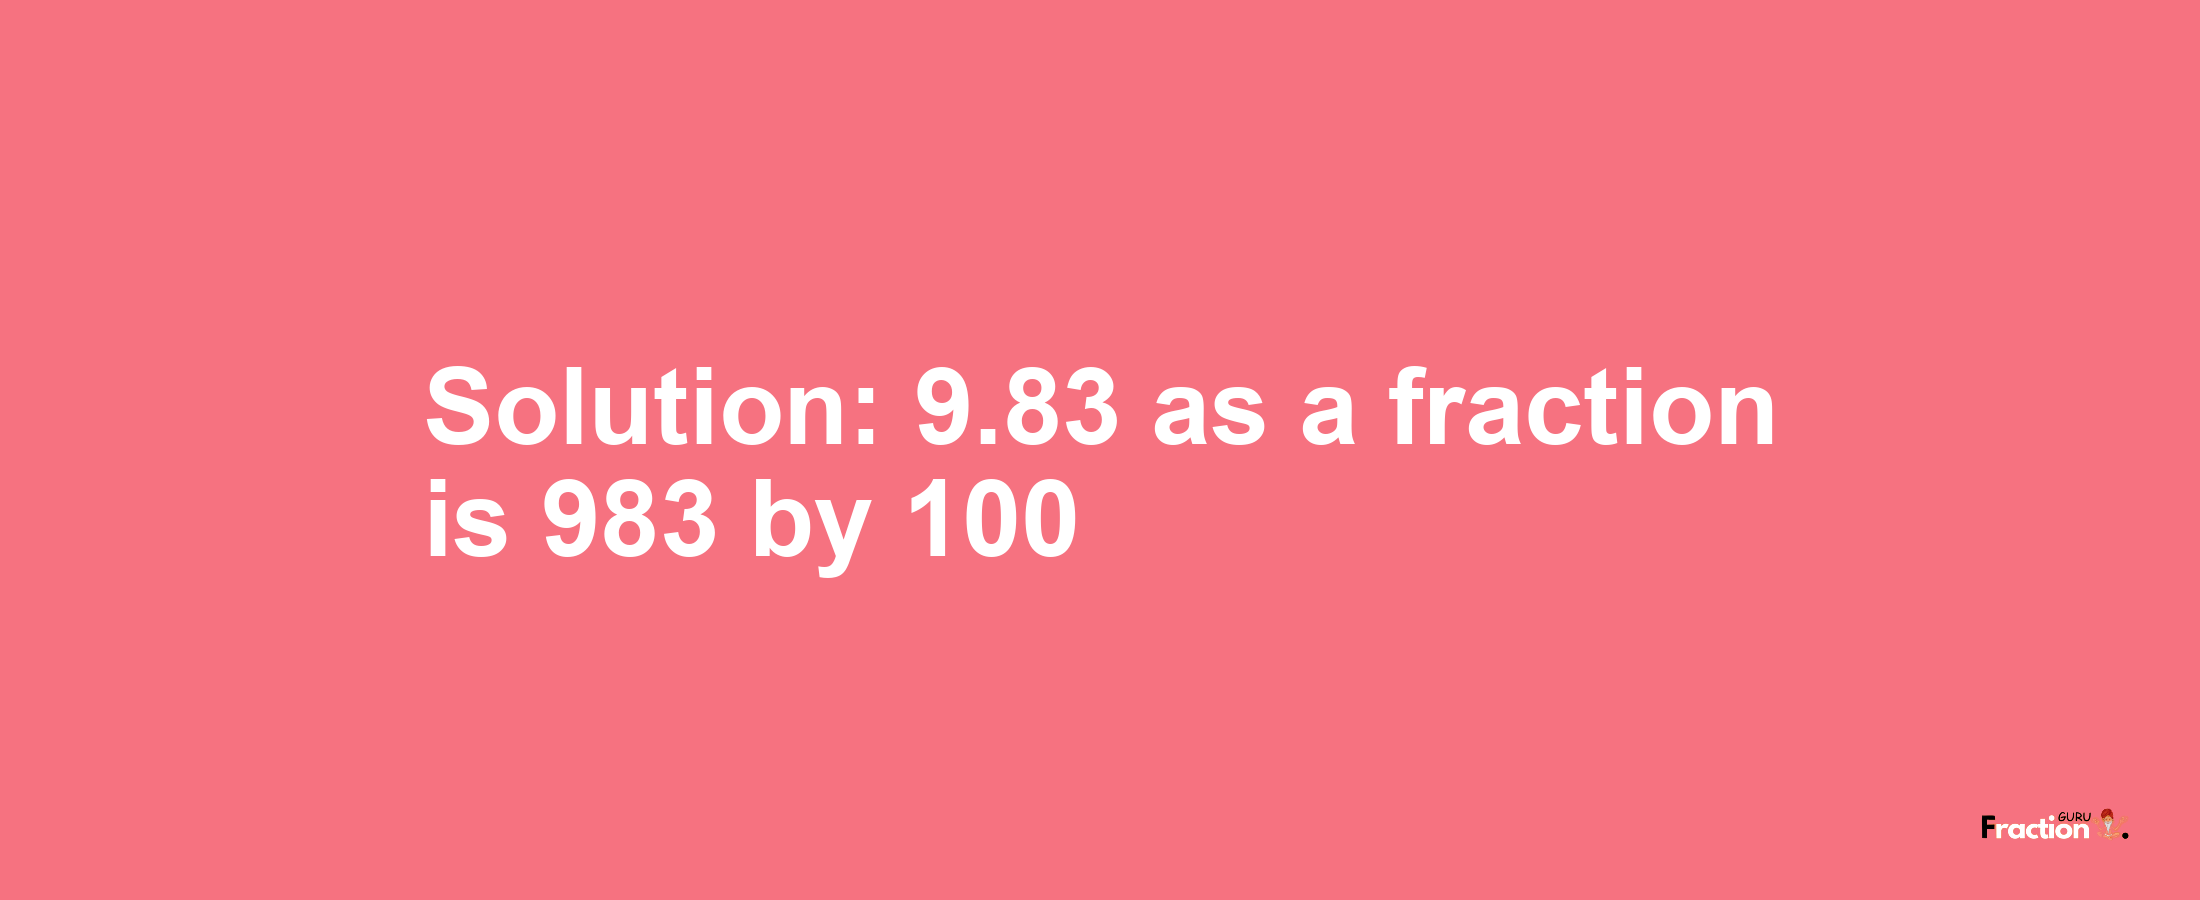 Solution:9.83 as a fraction is 983/100